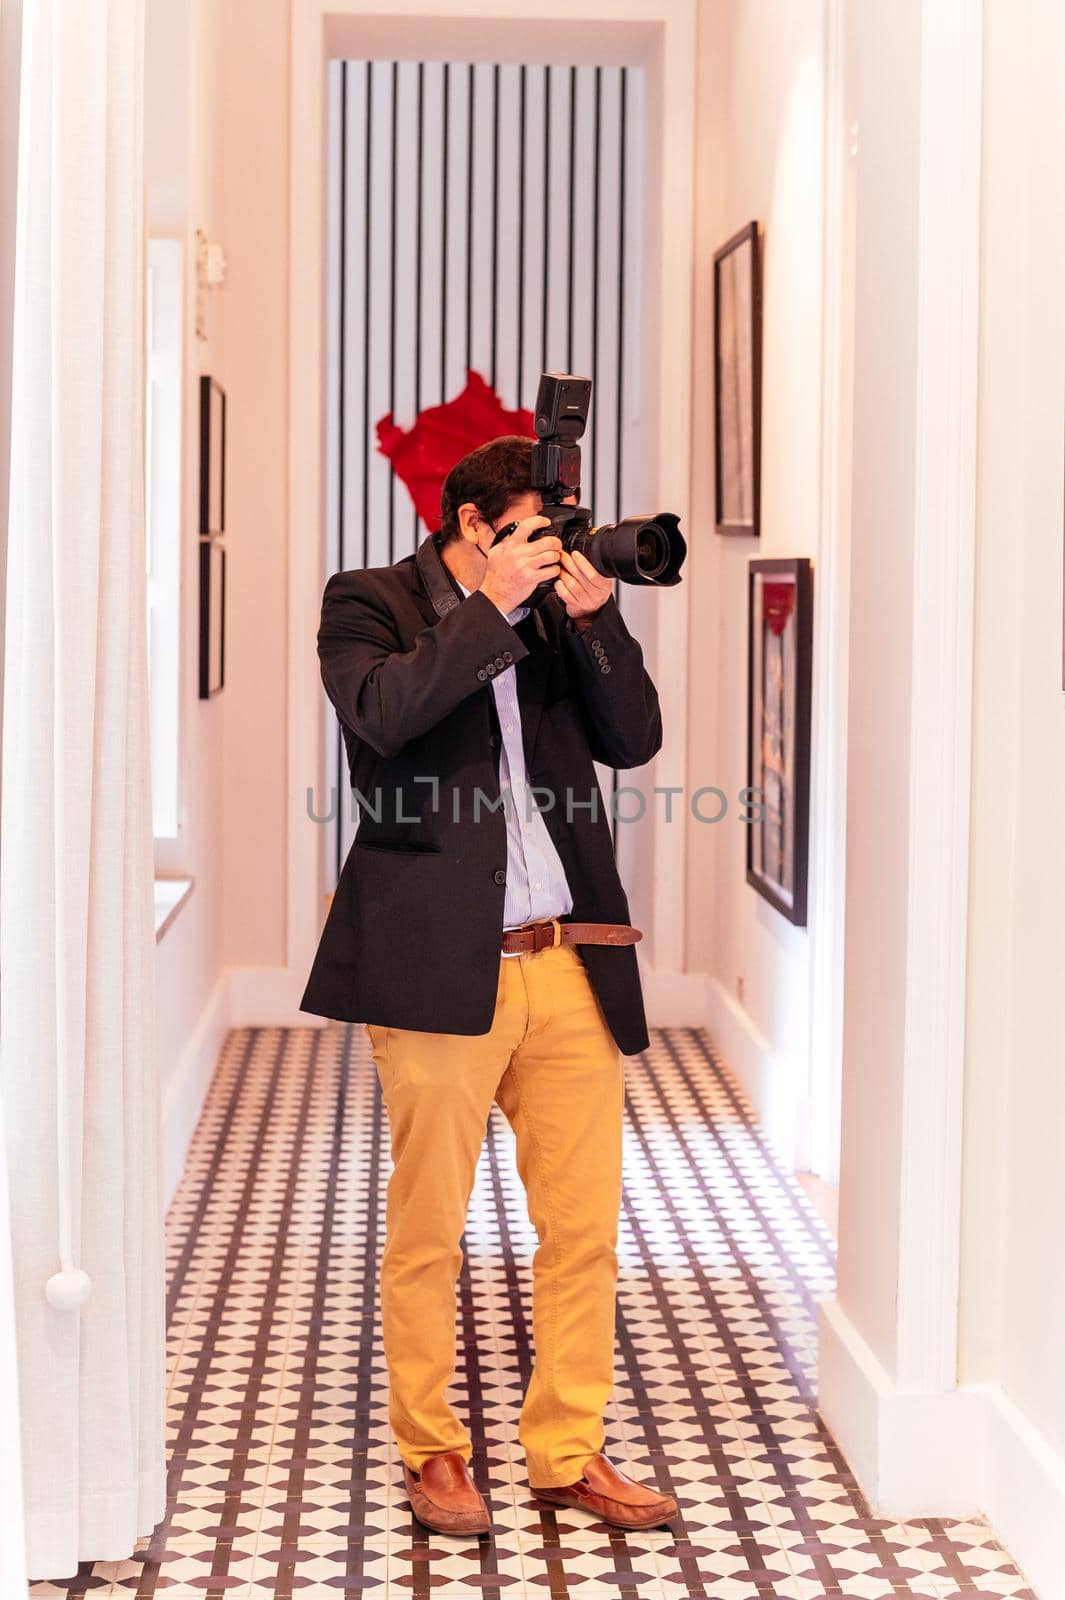 Young man taking photo with professional digital camera, focus on hand and lens. by Peruphotoart